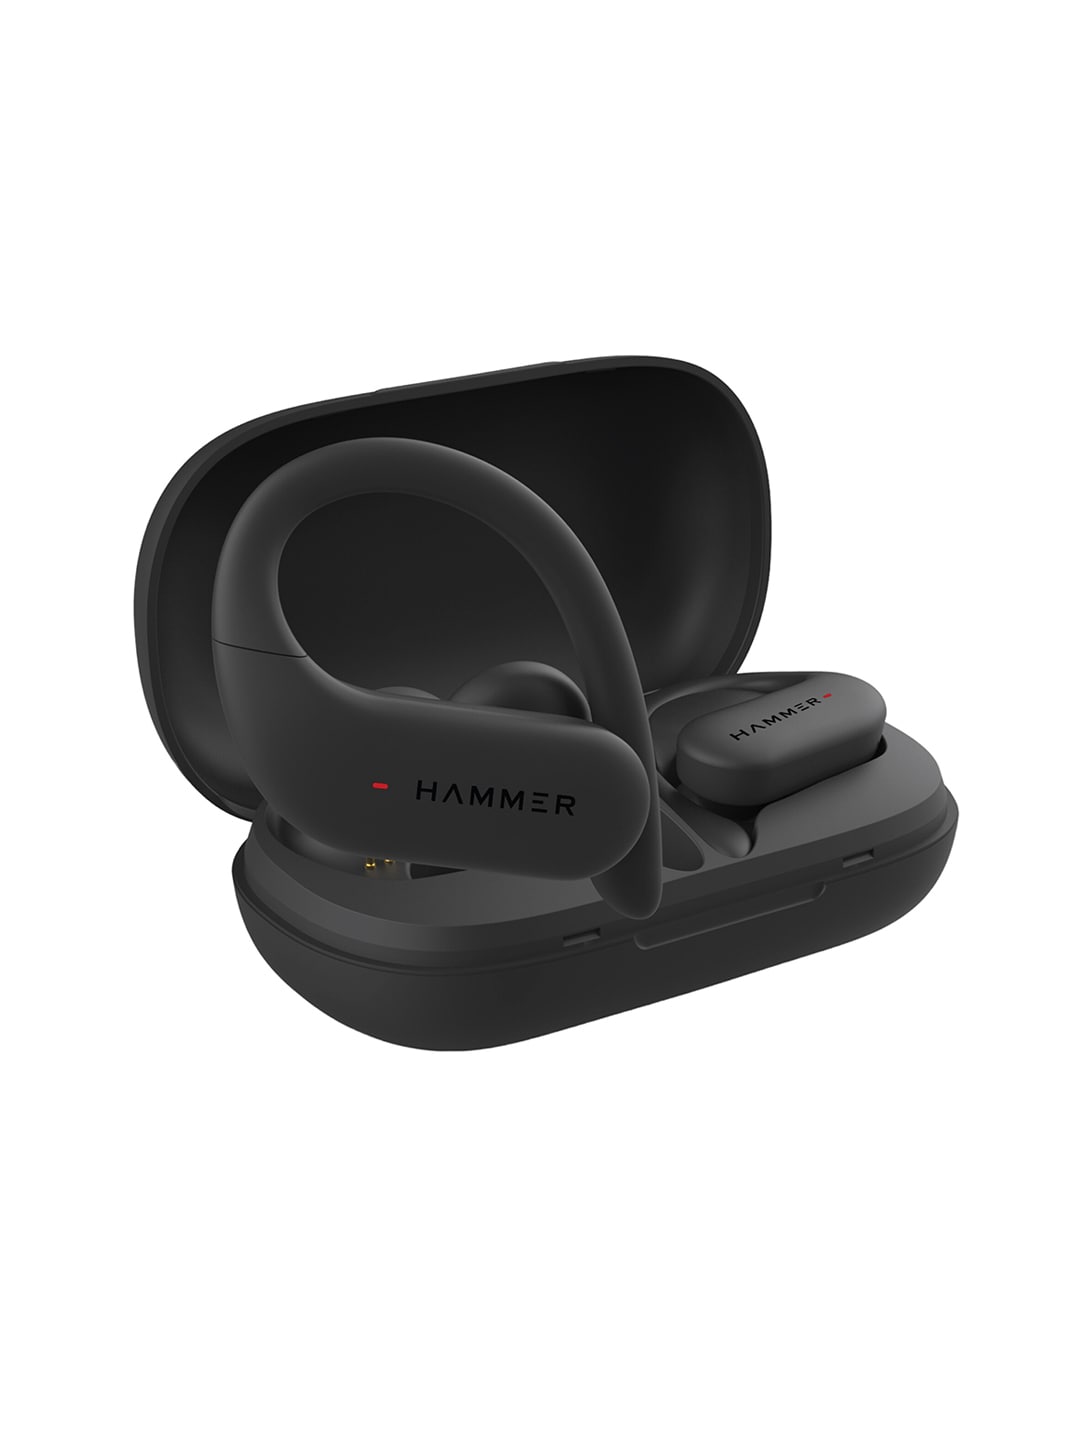 HAMMER Black Solid KO 2.0 Sports True Wireless Earbuds Price in India